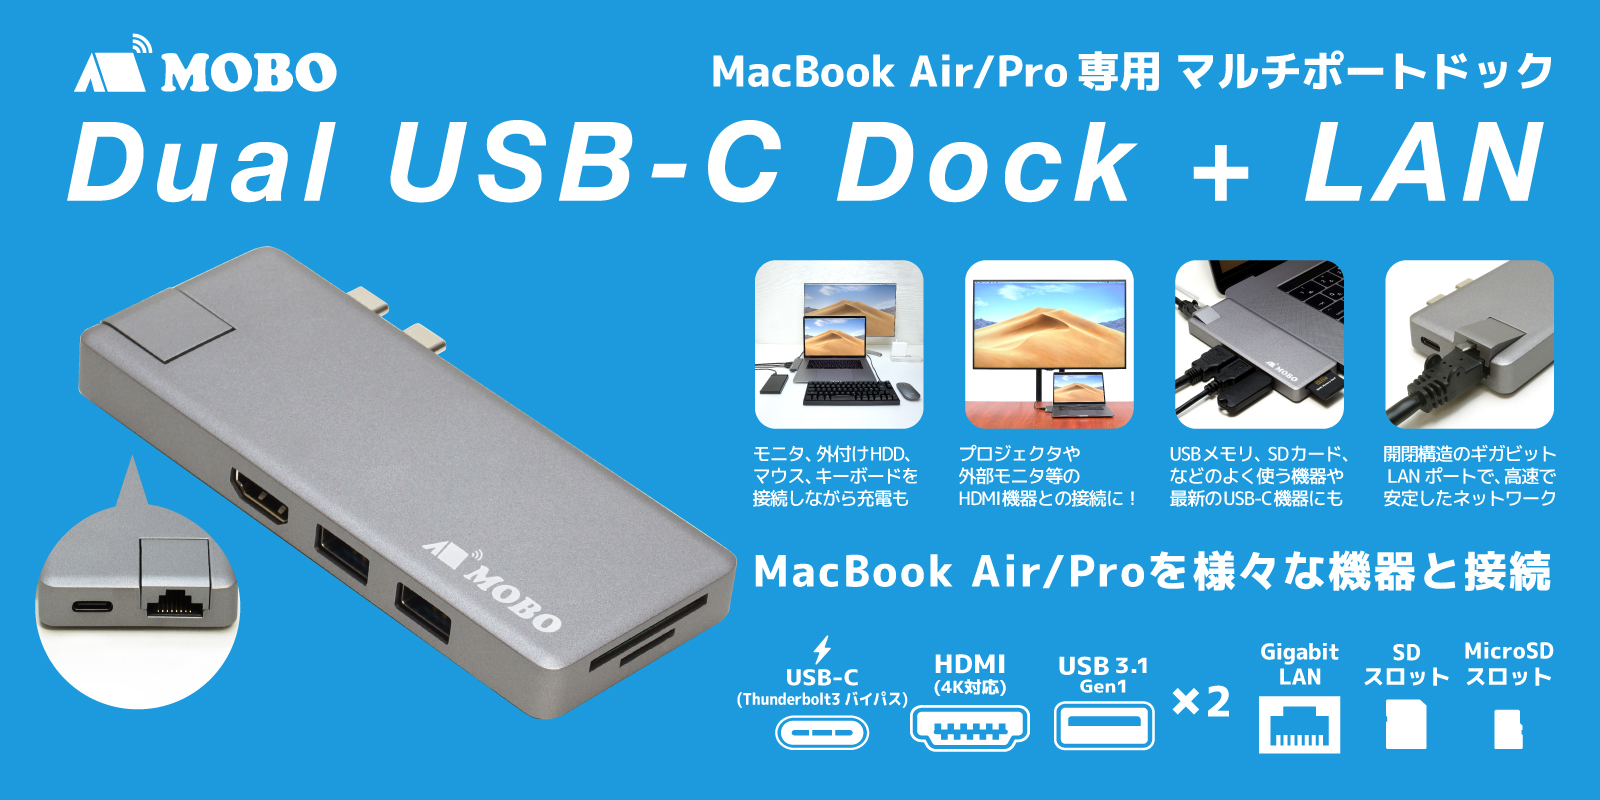 Dual USB-C Dock for MBP